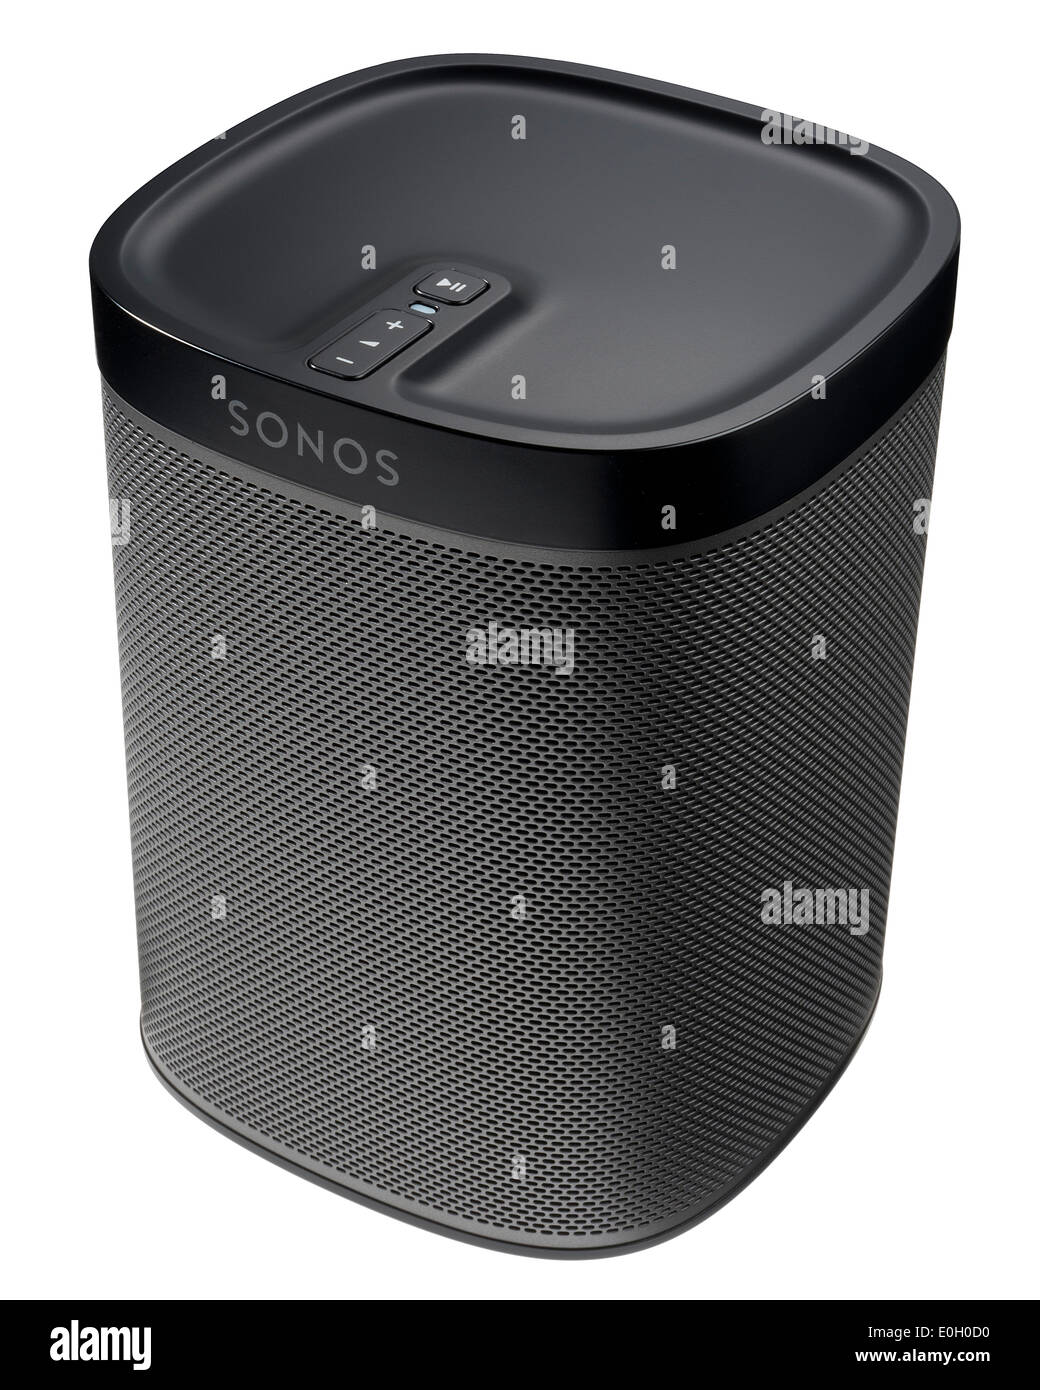 Sonos Play 1 High Resolution Stock Photography and Images - Alamy